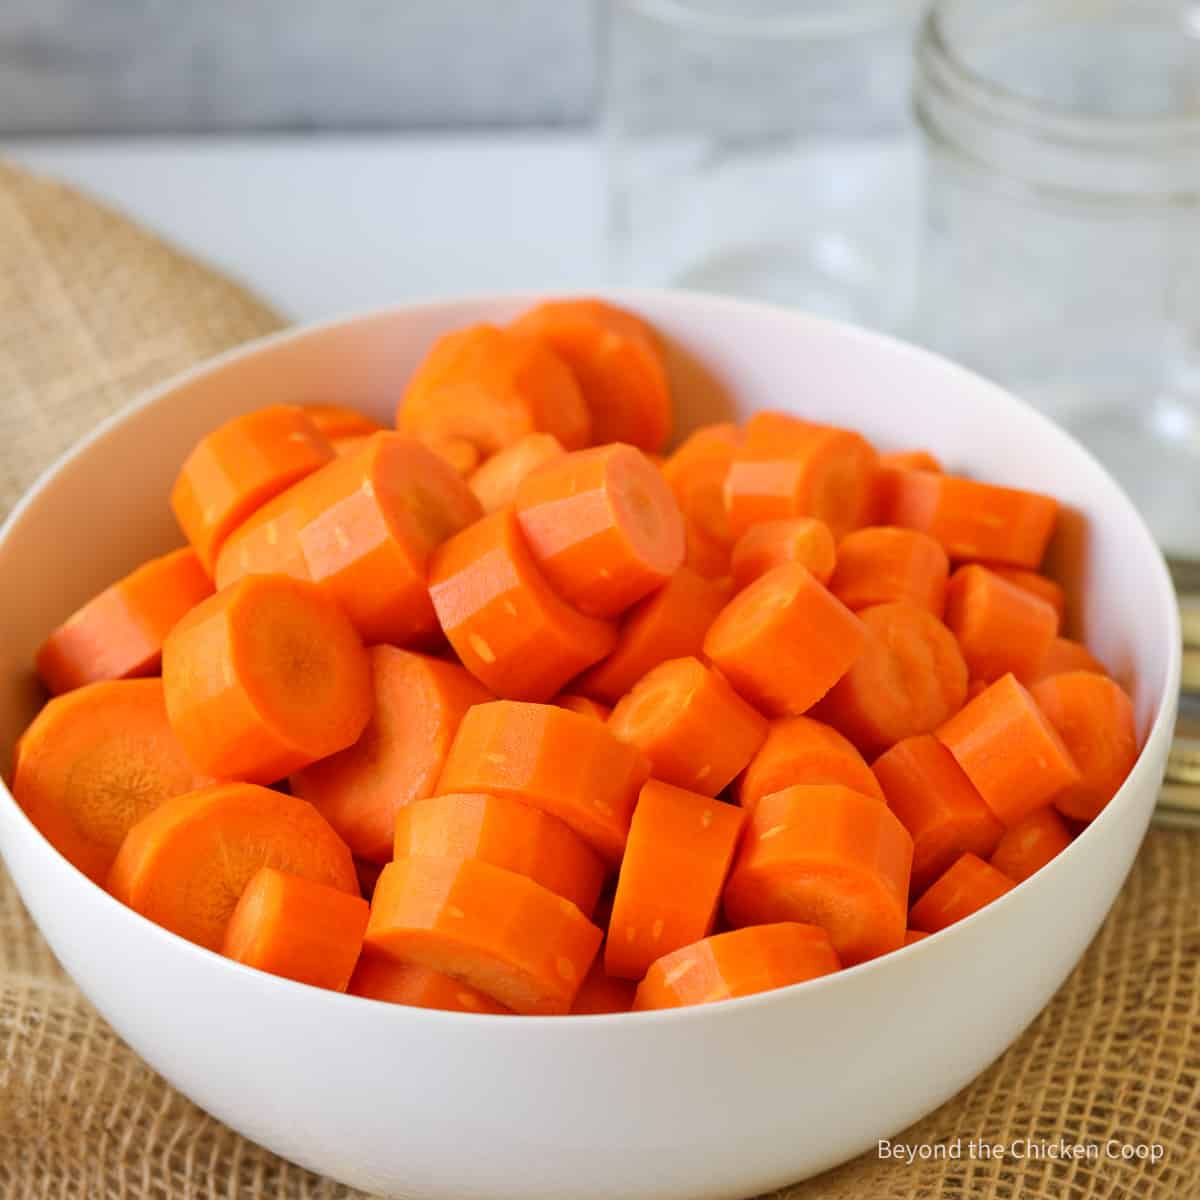 Sliced carrots in a bowl.